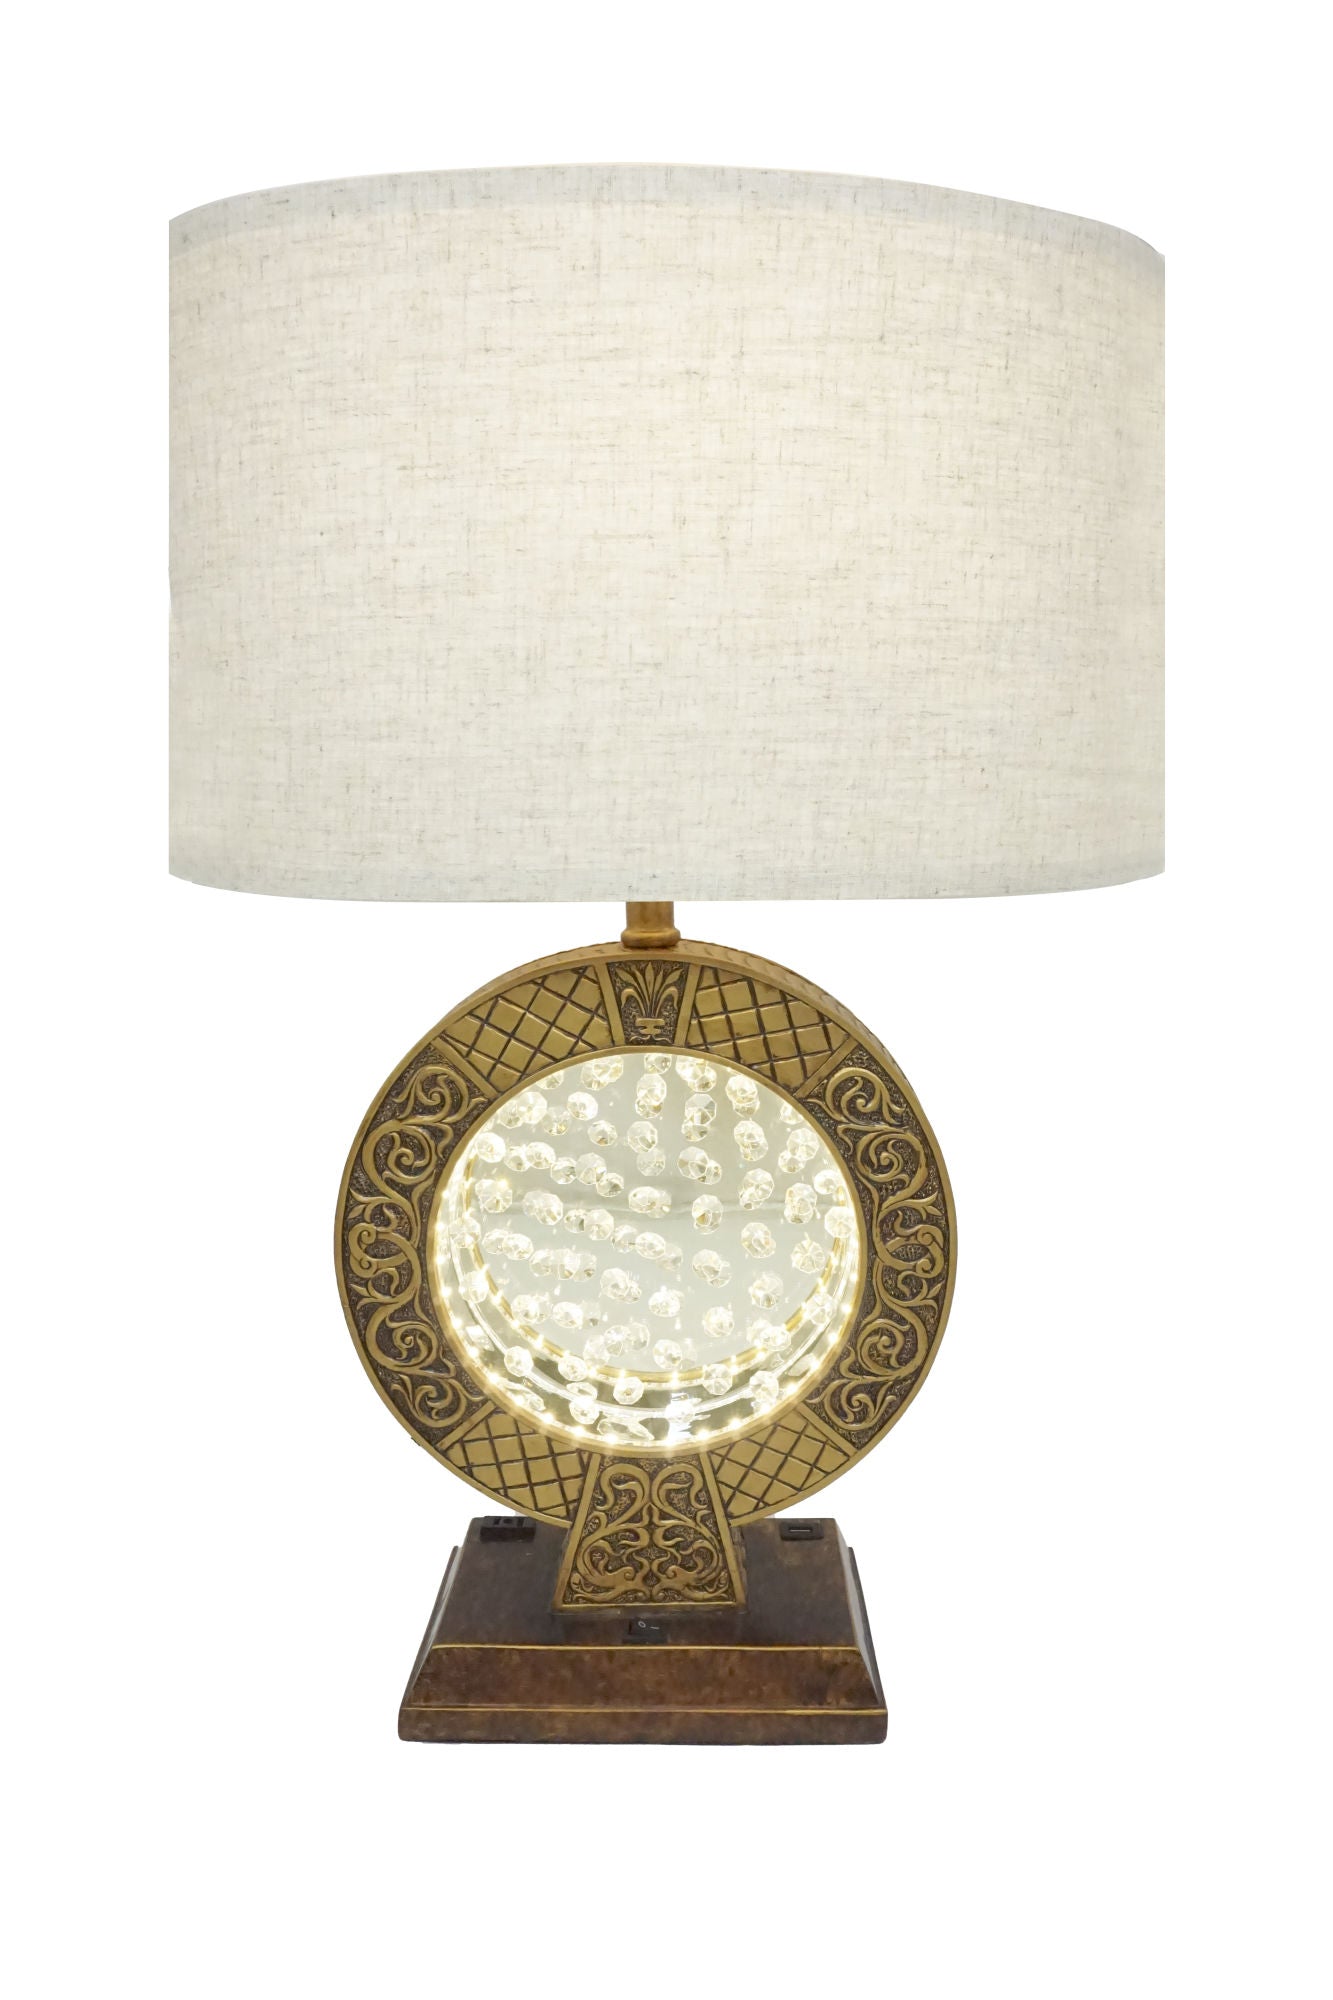 28" Antique polyresin Table Lamp, USB Port on Base with floating crystal decor on center